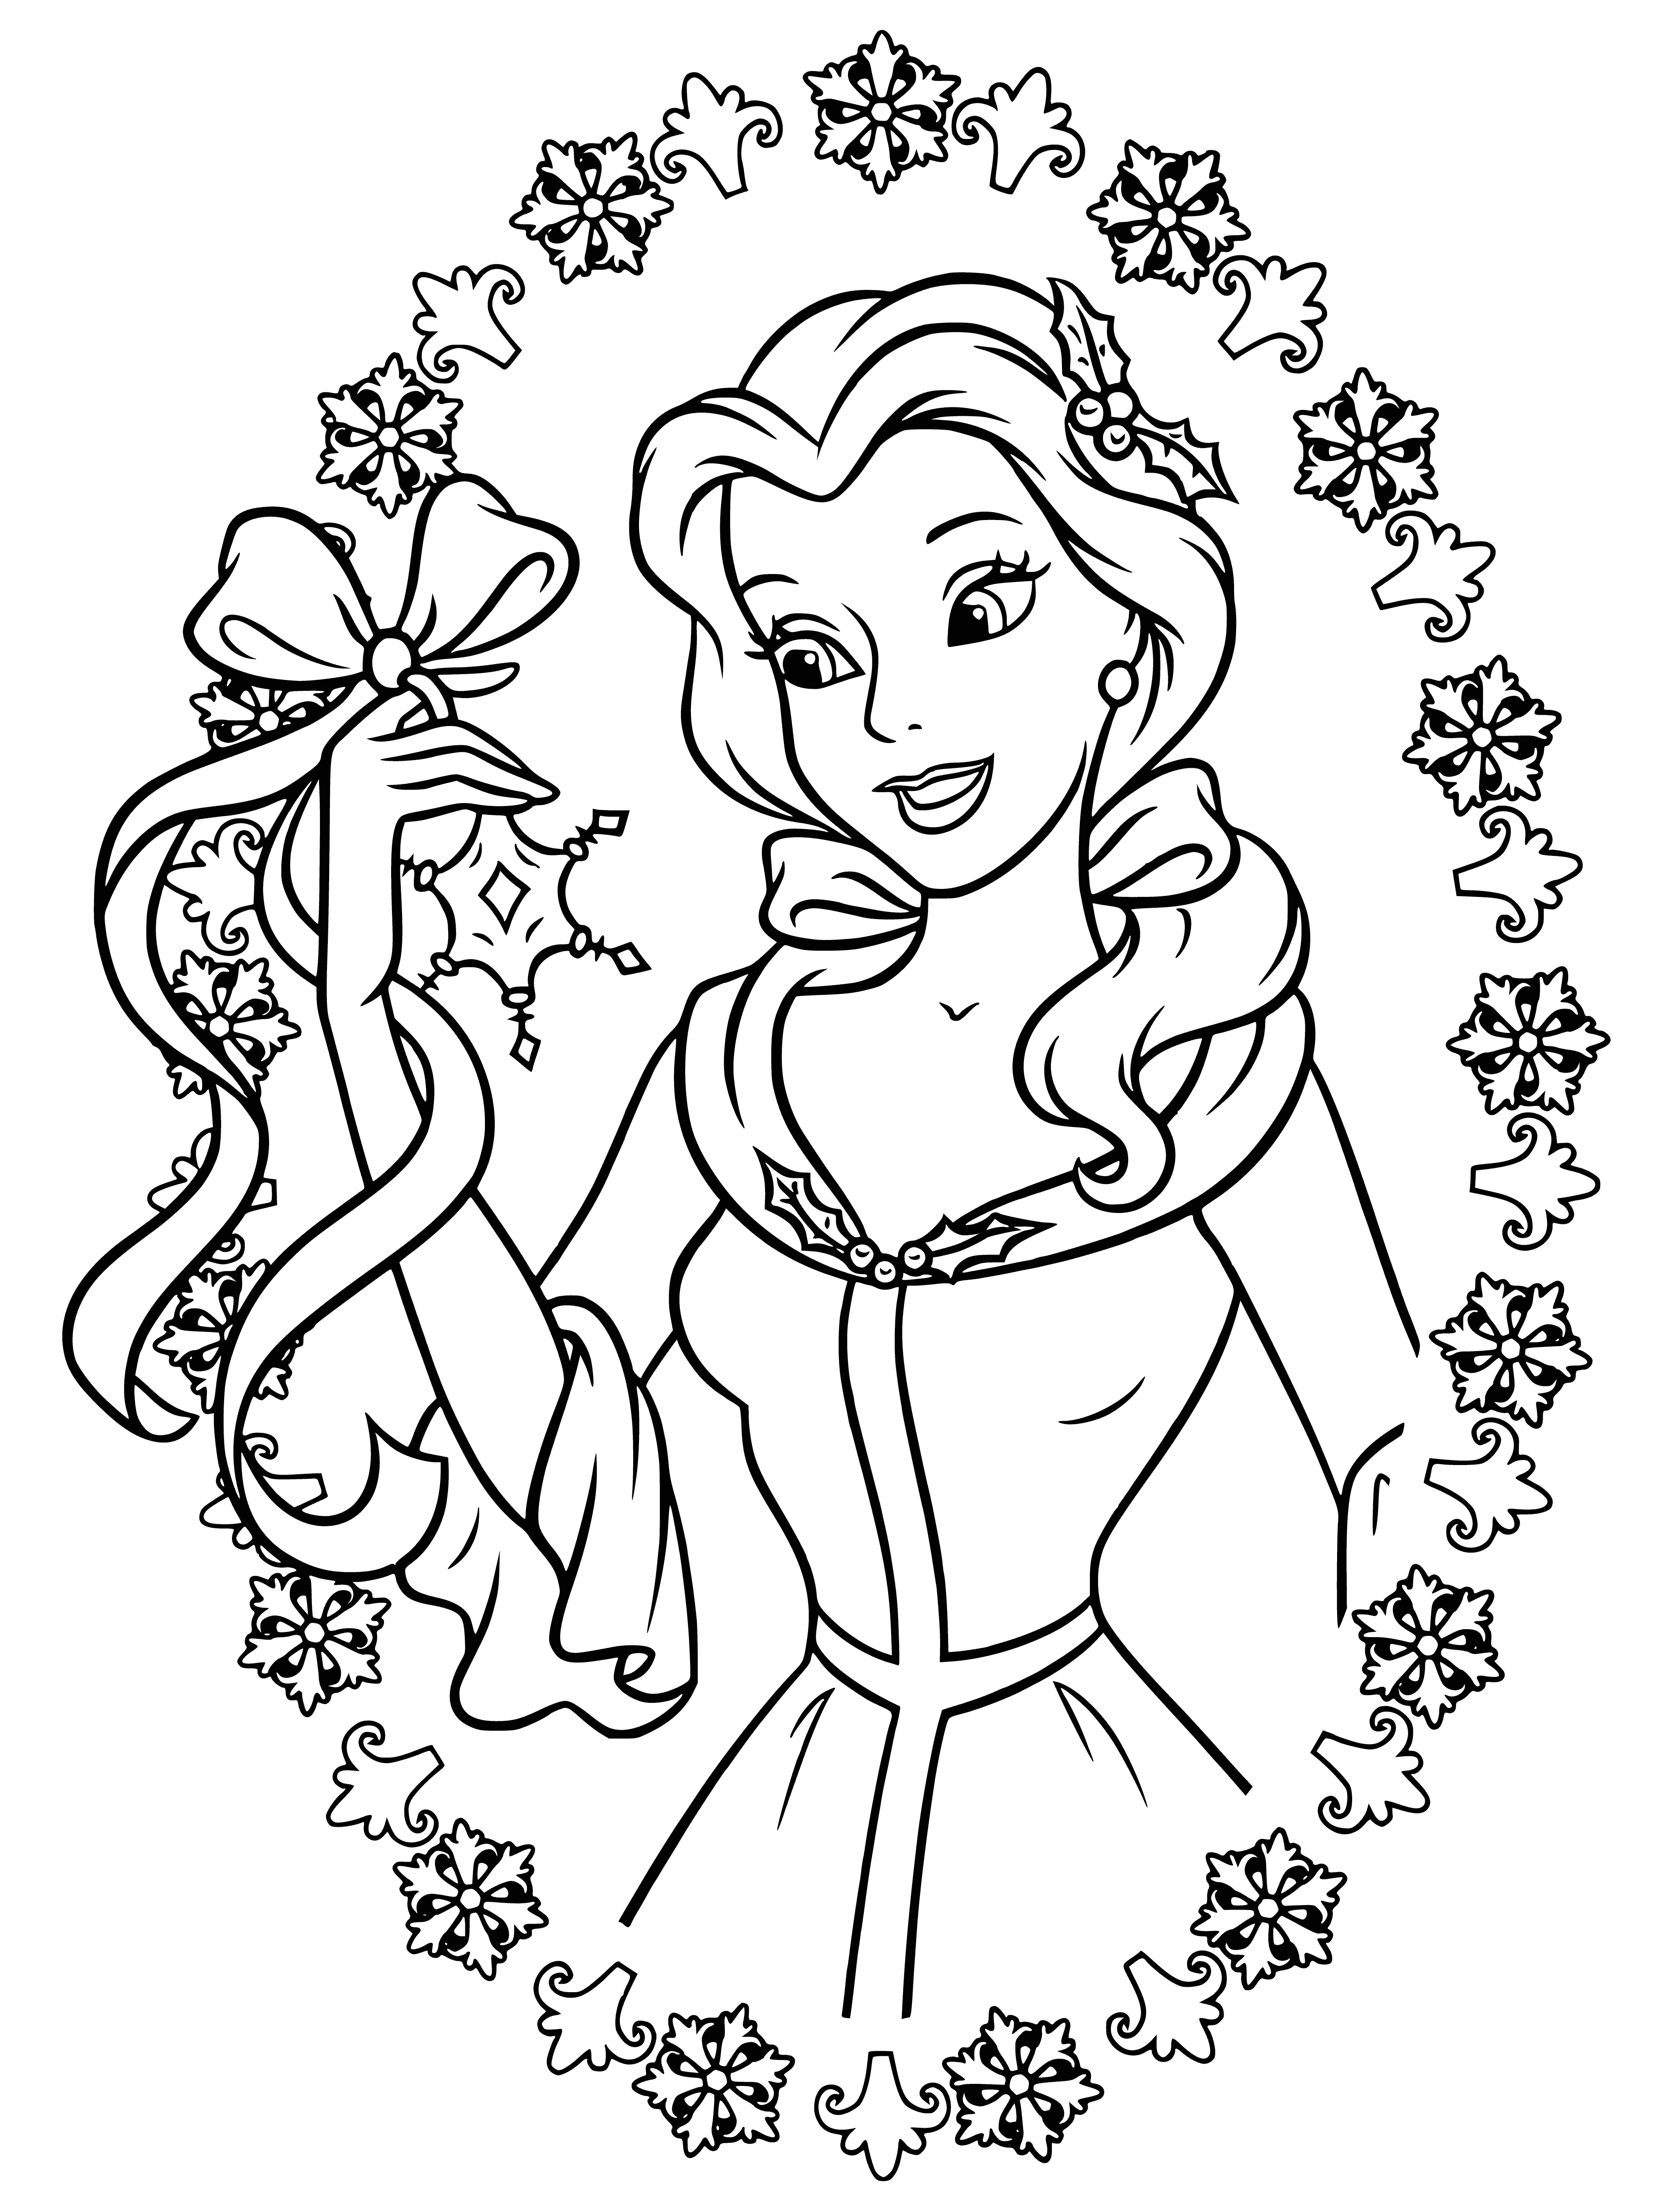 coloring page: Disney princesses celebrate the New Year with Belle holding a snowflake and smiling faces all around!